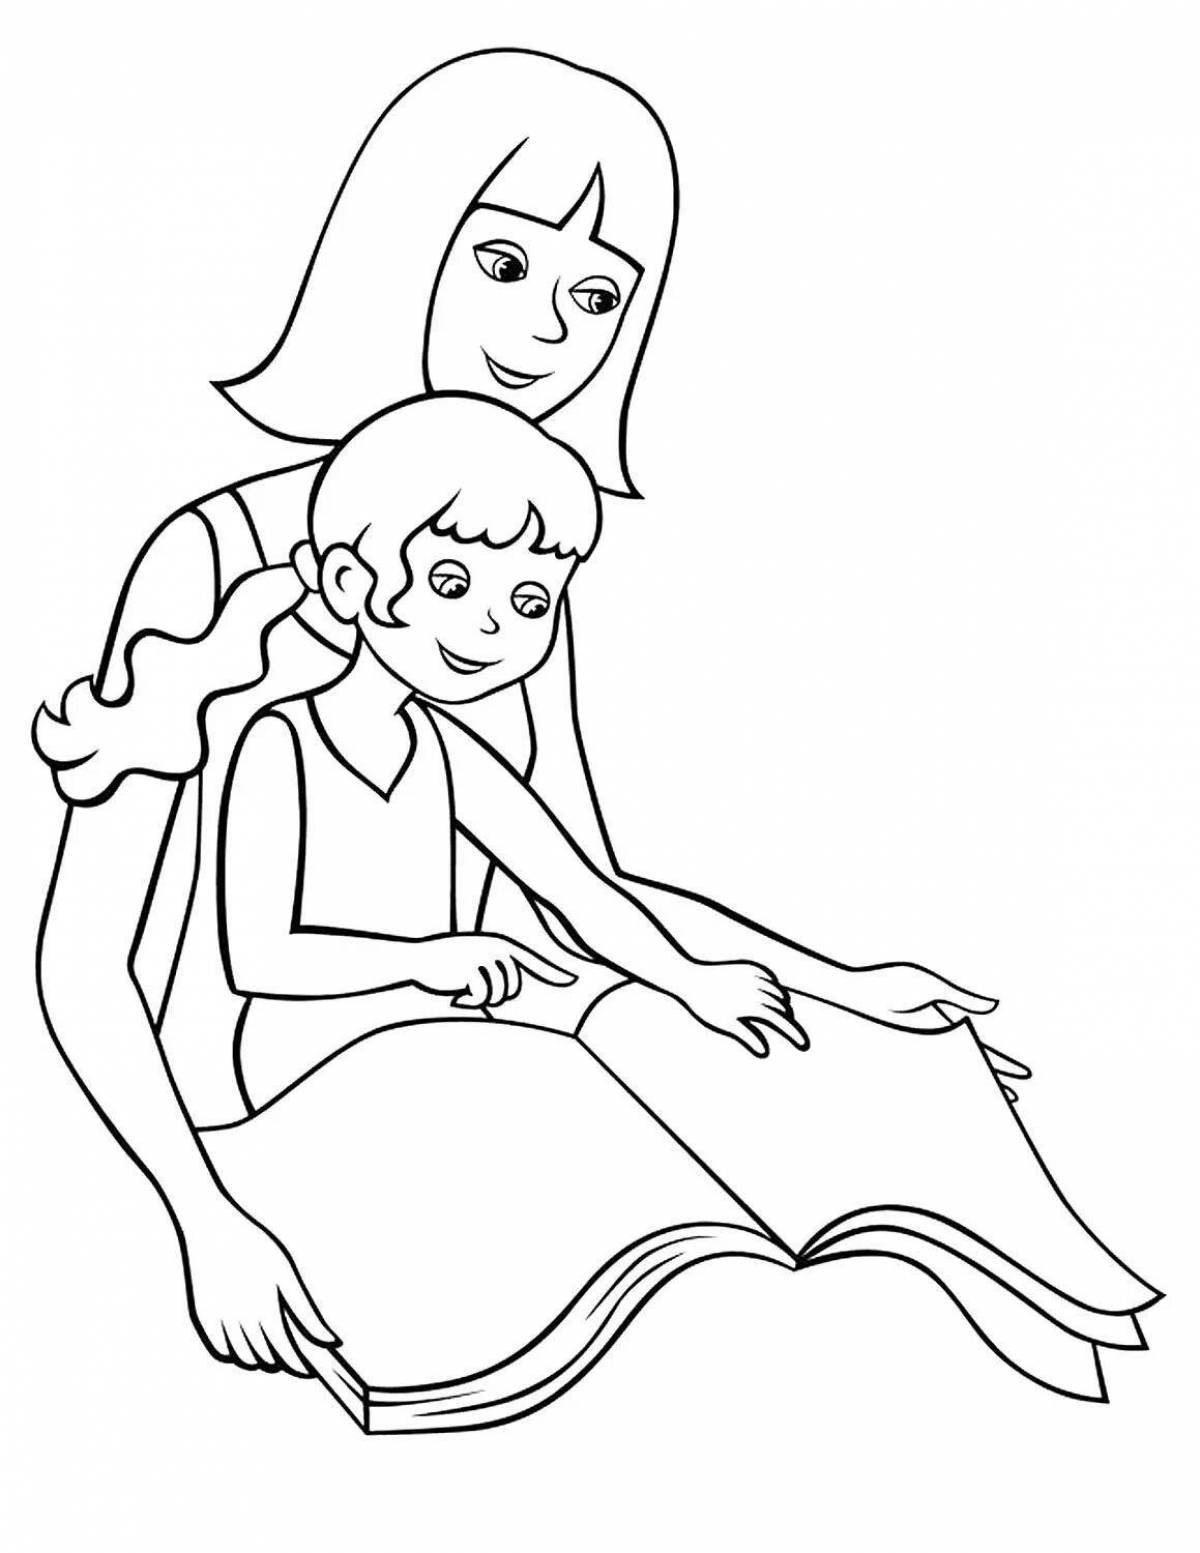 Colorful mommy coloring book